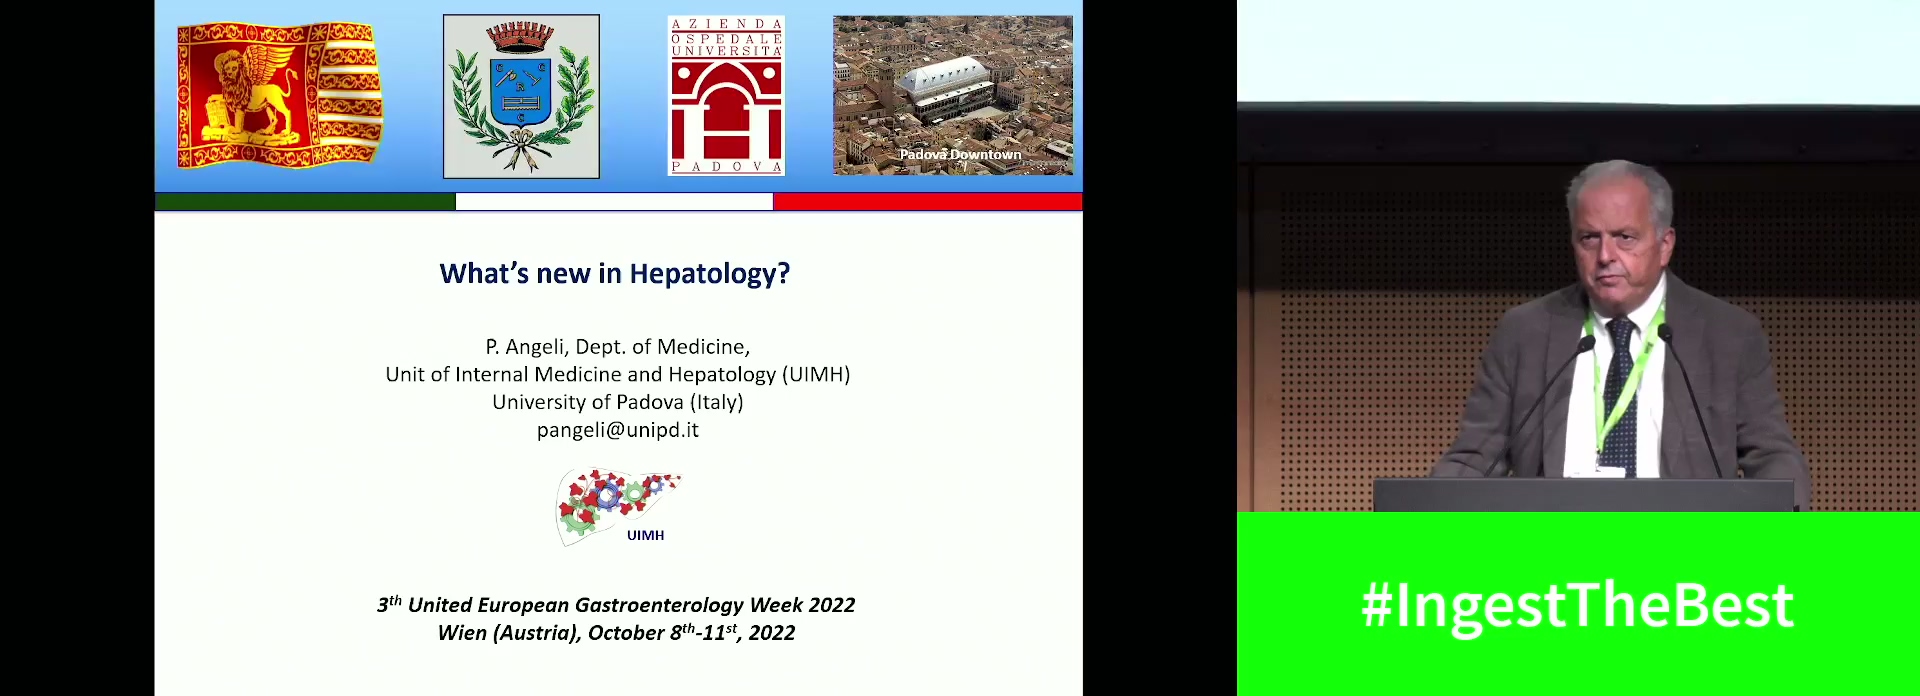 What's new in Hepatology?